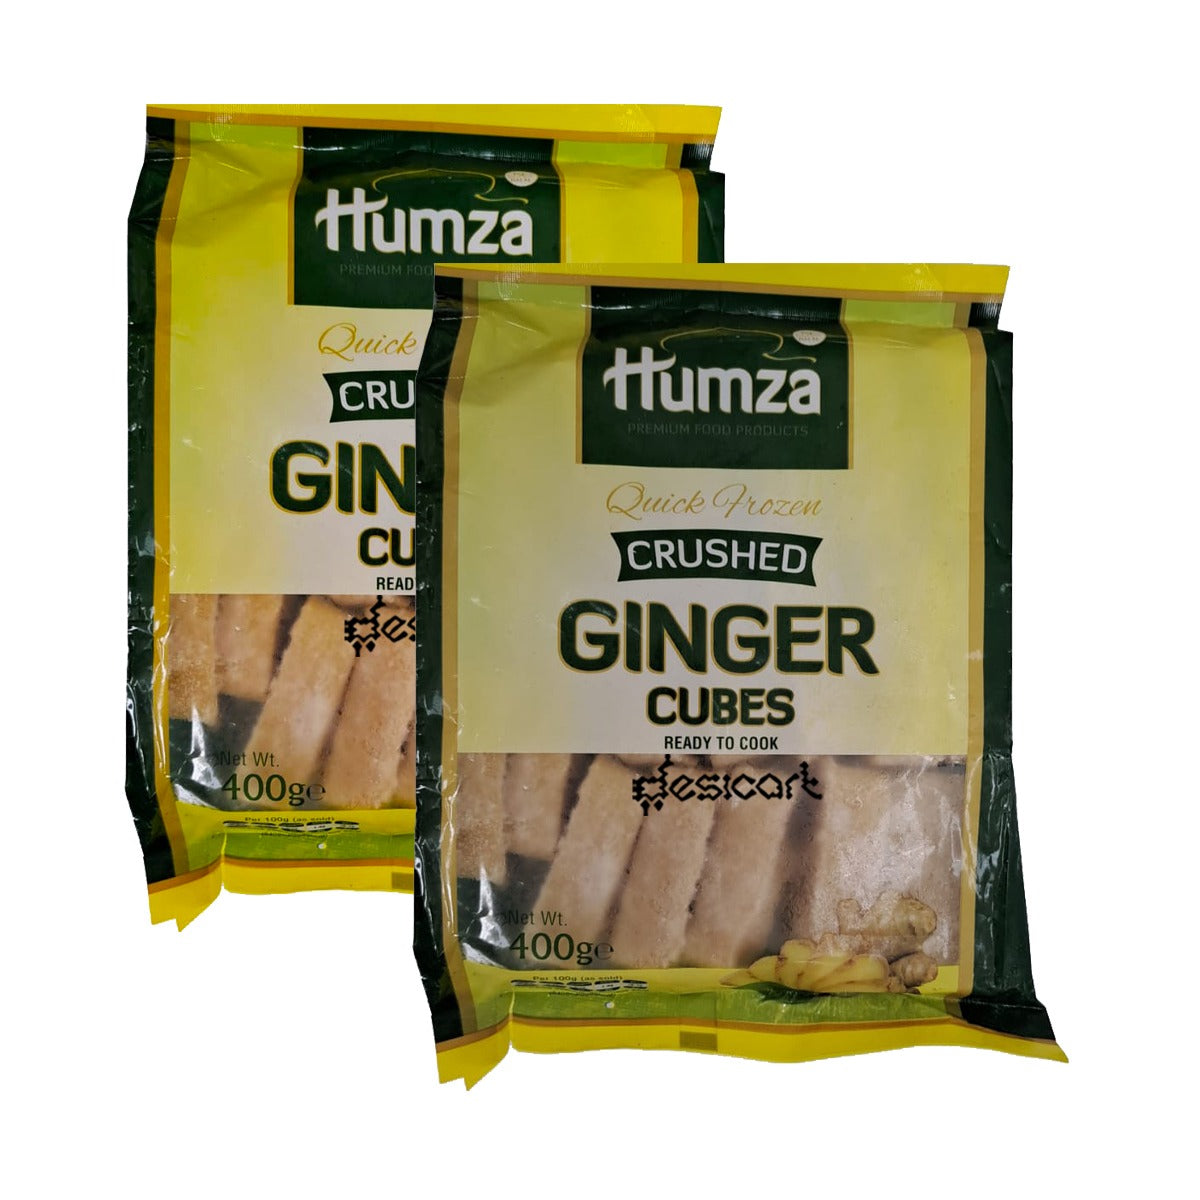 Humza Crushed Ginger Pack of 2 400g